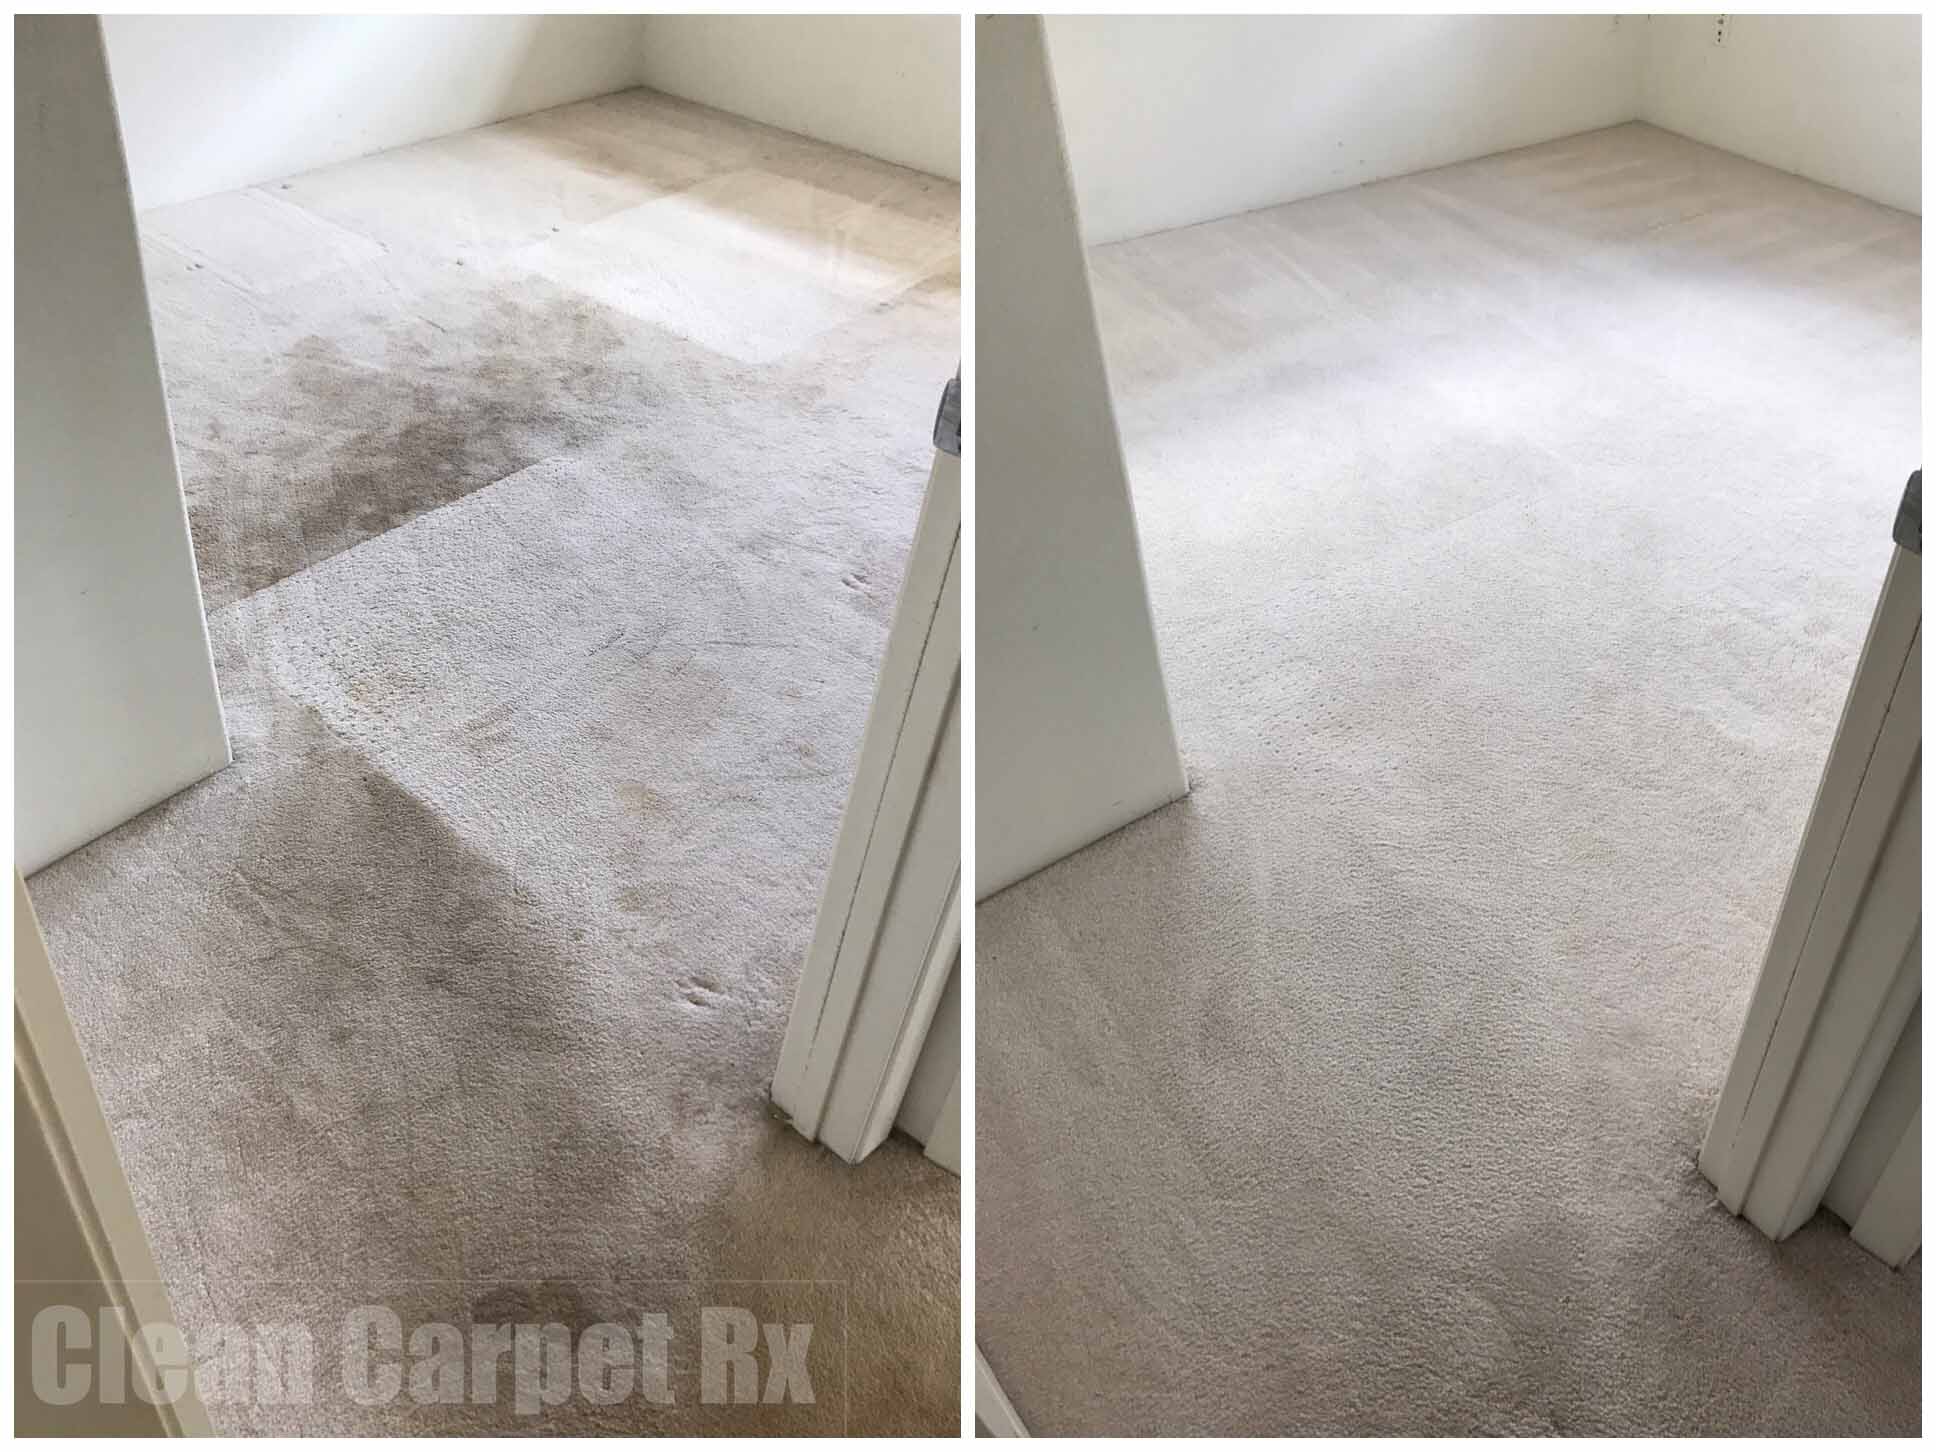 Do You Have to Clean Carpets When You Move Out?